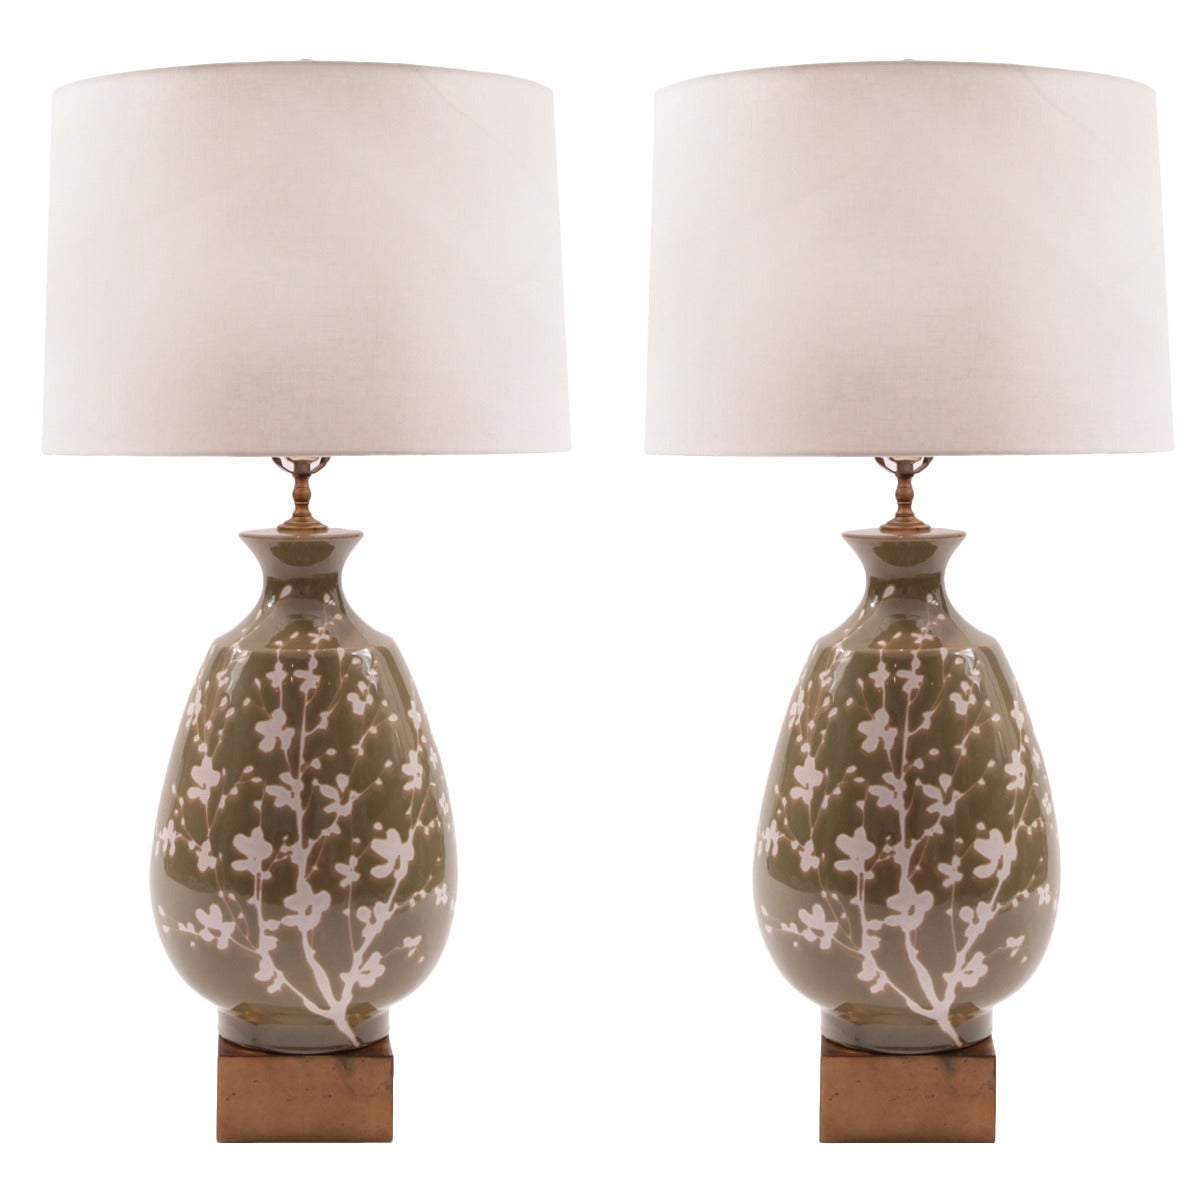 Large-Scale Pair of Italian Floral Motif and Brass Lamps